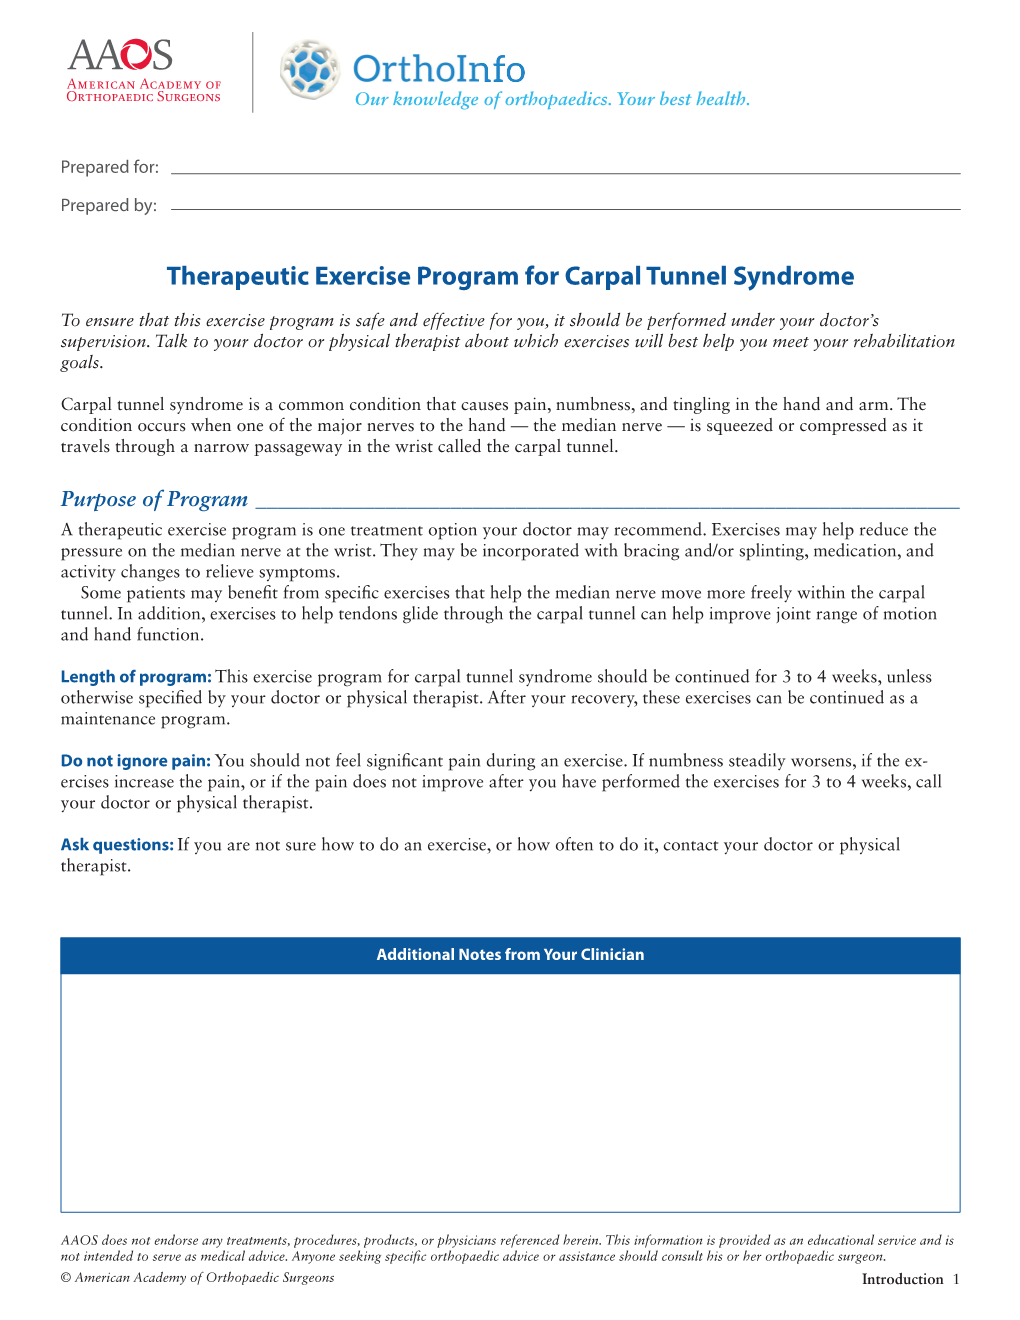 Therapeutic Exercise Program for Carpal Tunnel Syndrome